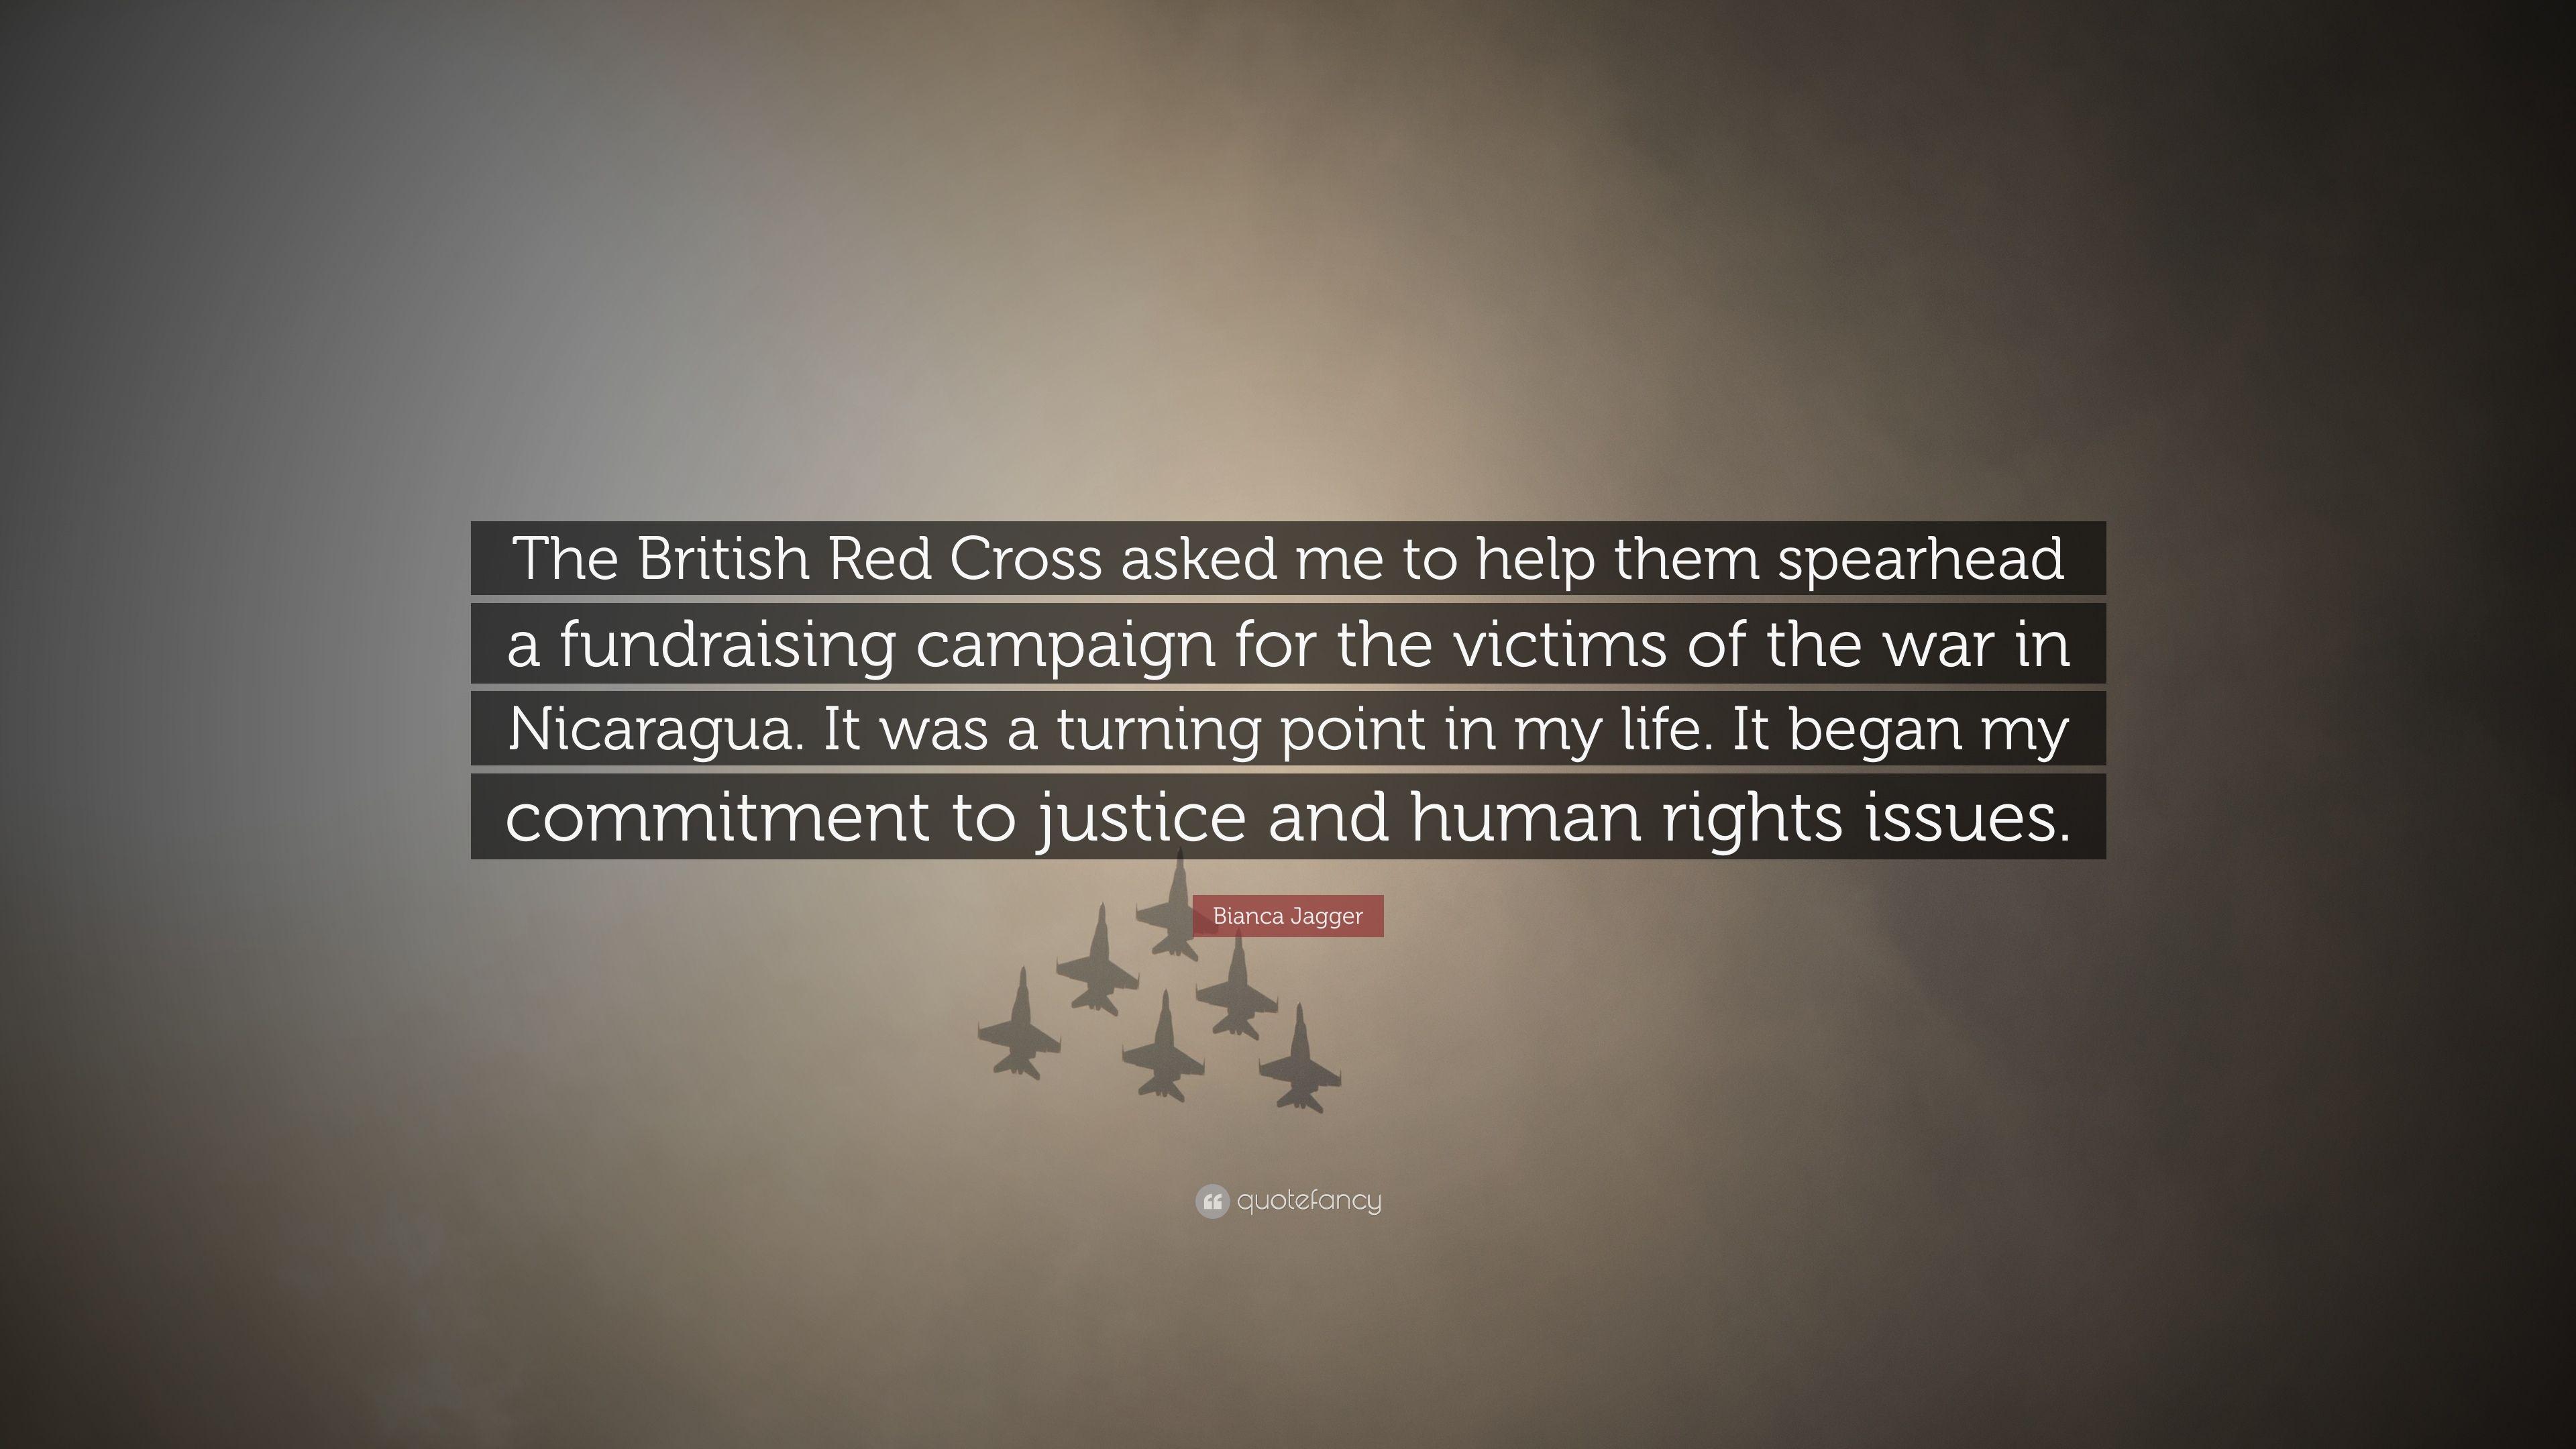 Bianca Jagger Quote: “The British Red Cross asked me to help them